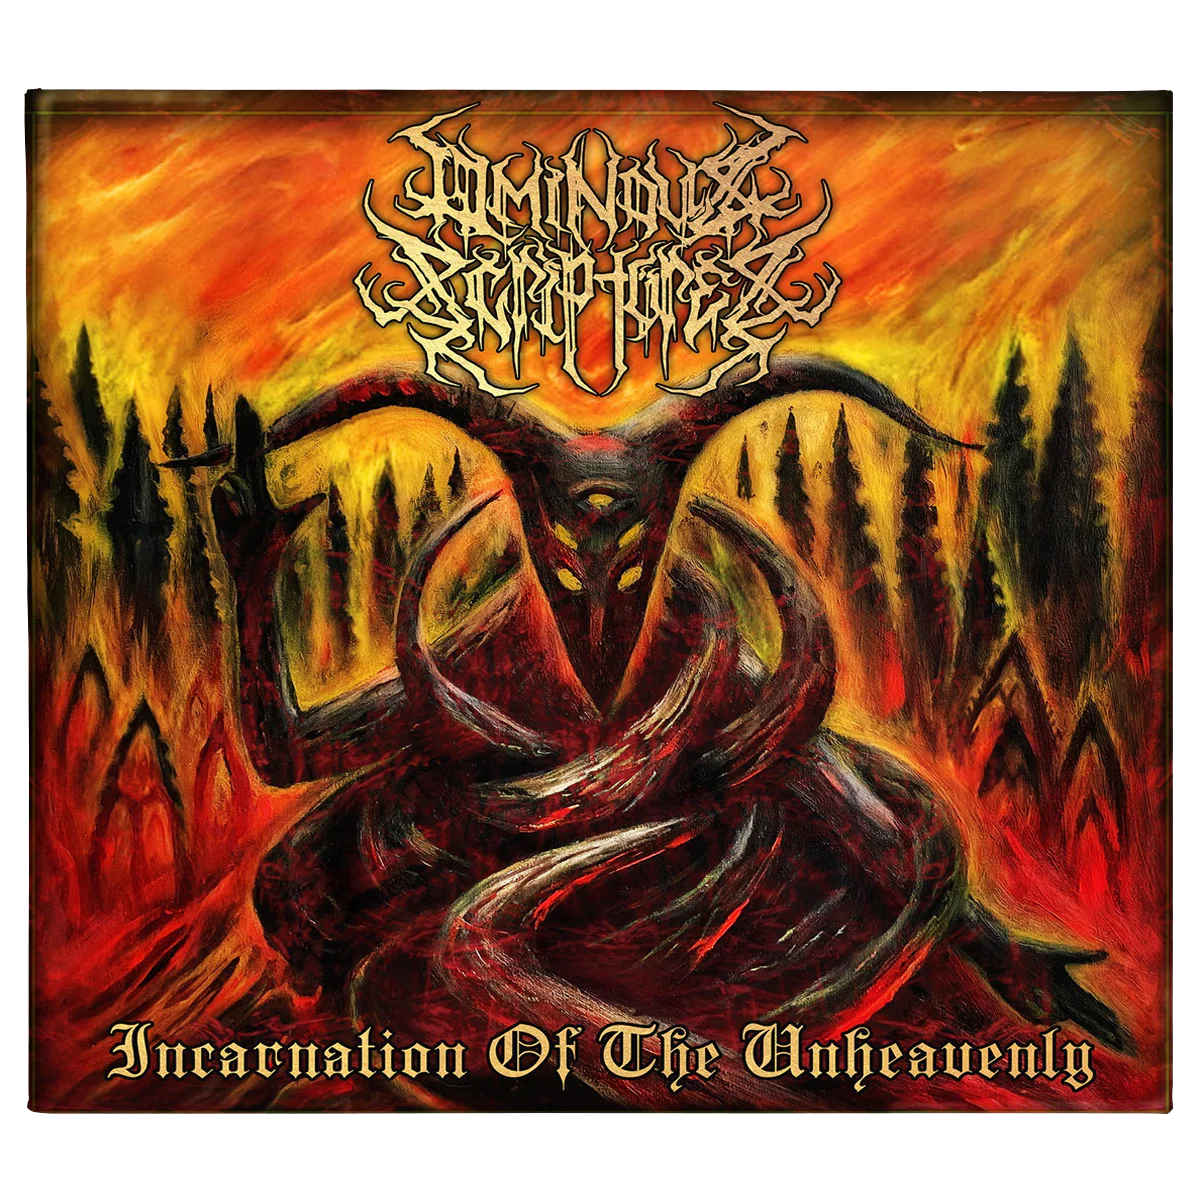 Ominous Scriptures 'Incarnation Of The Unheavenly' CD